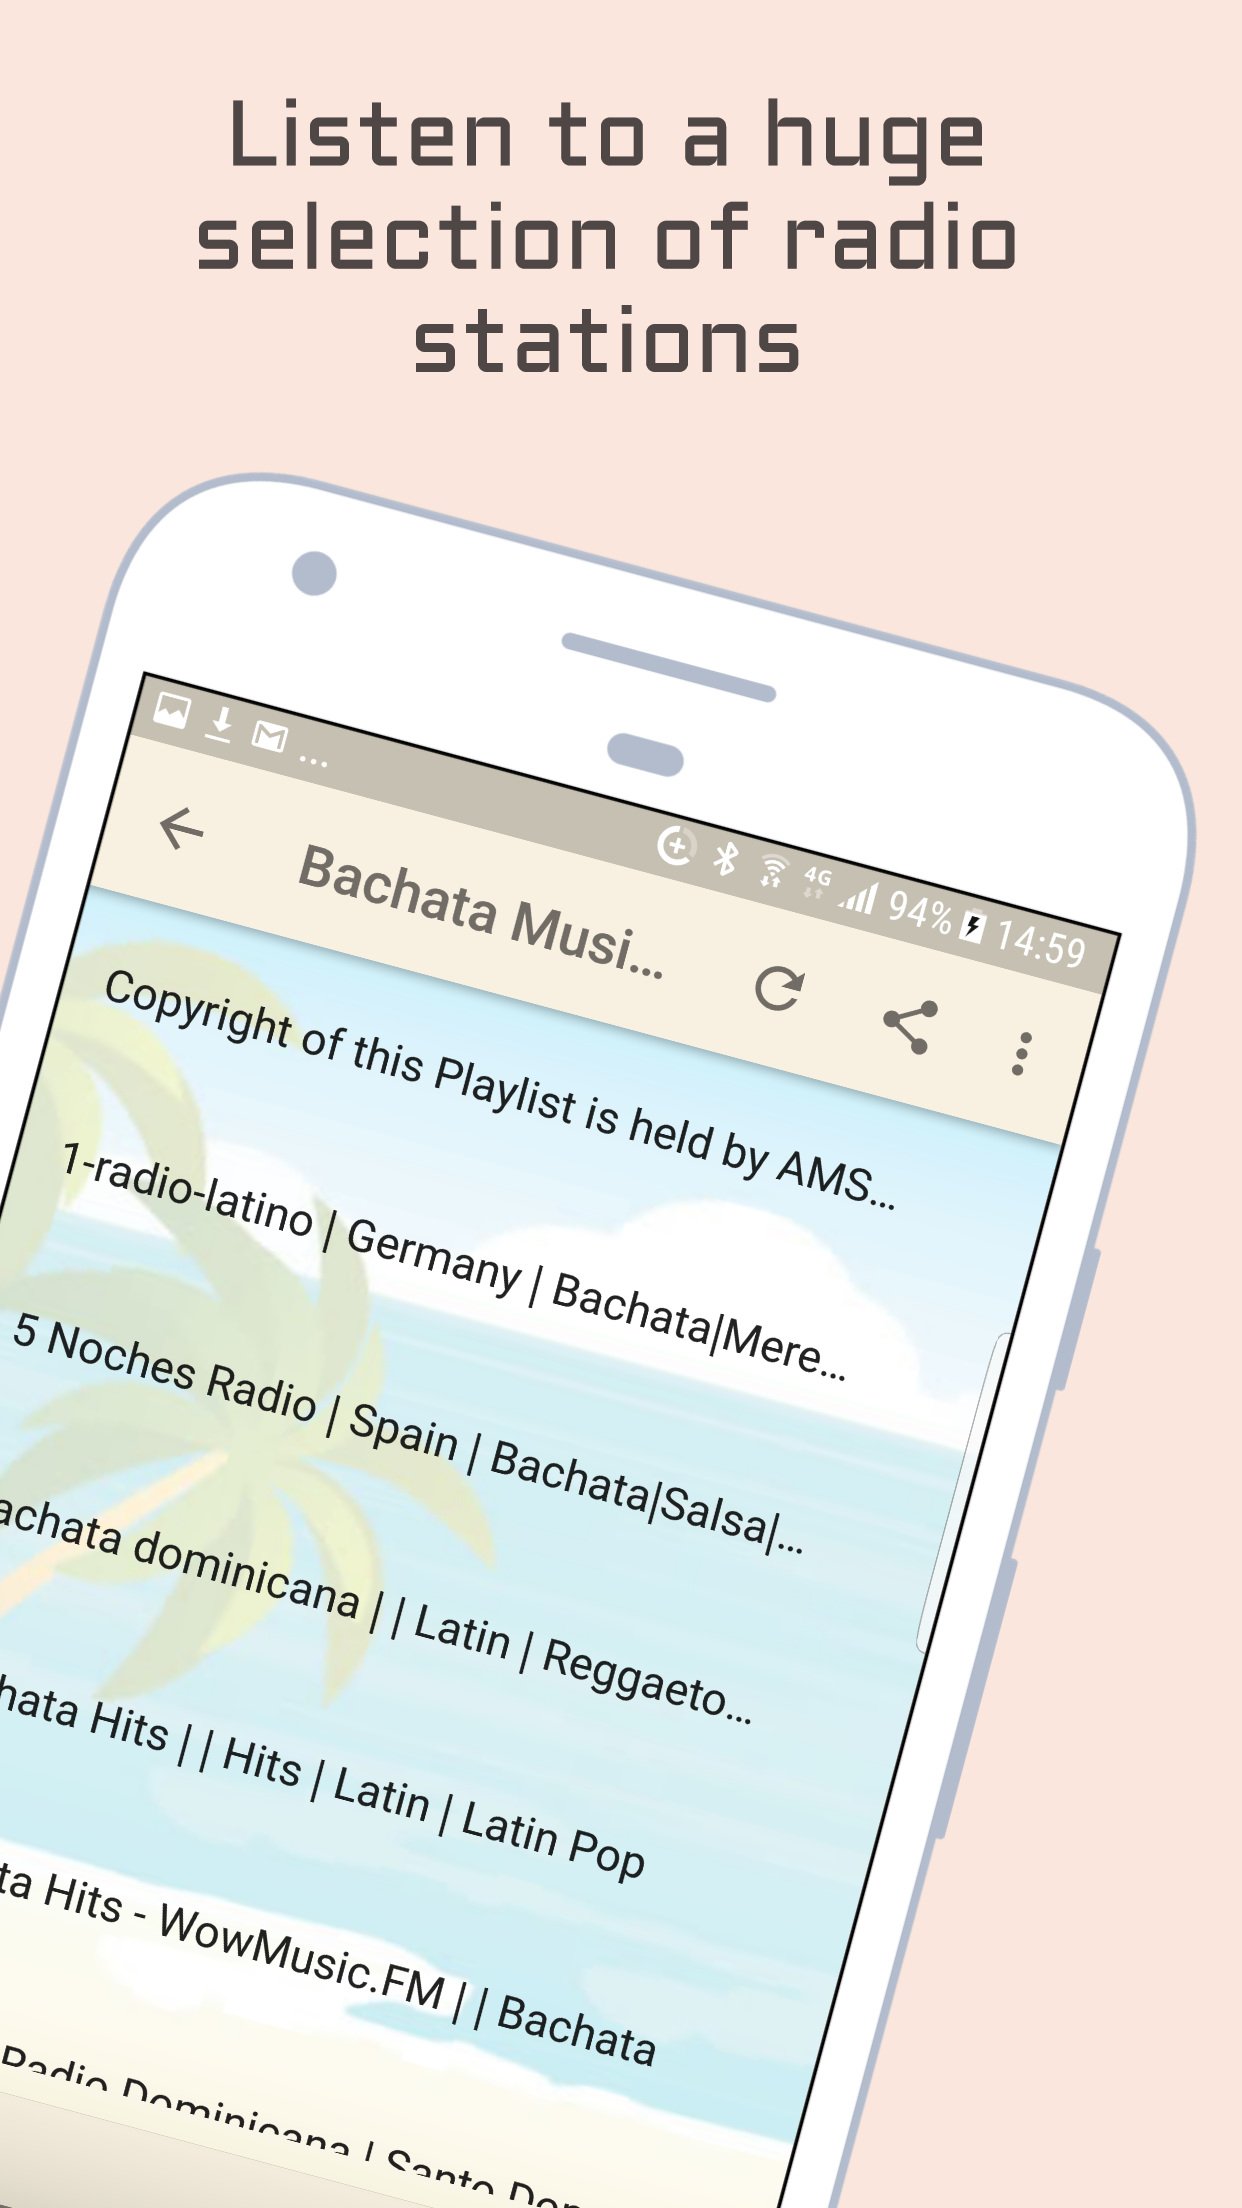 Bachata Music Radio Stations APK 1.0 for Android – Download Bachata Music  Radio Stations APK Latest Version from APKFab.com